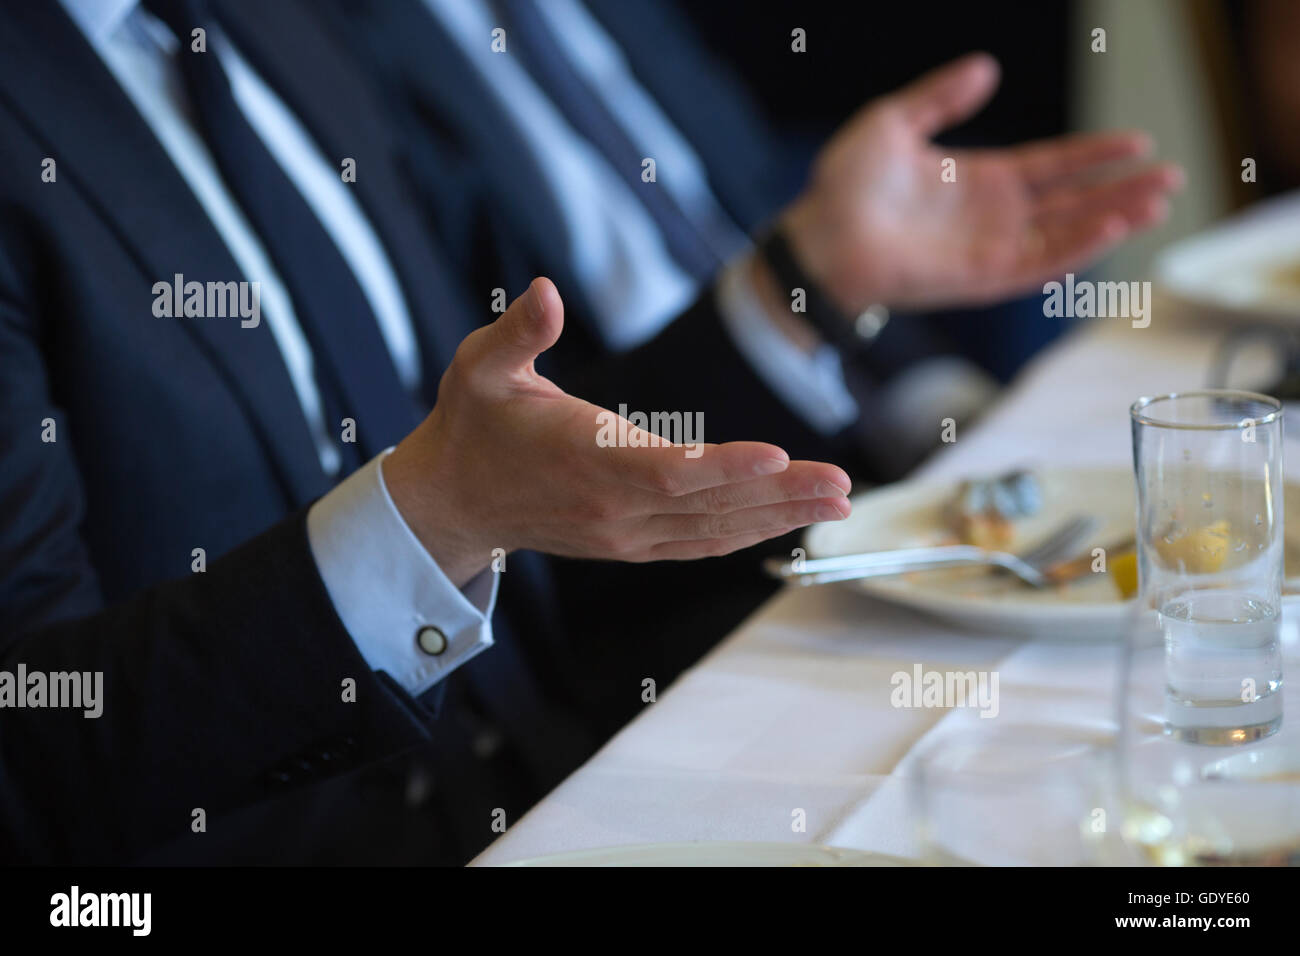 Corporate business lunch Foto Stock